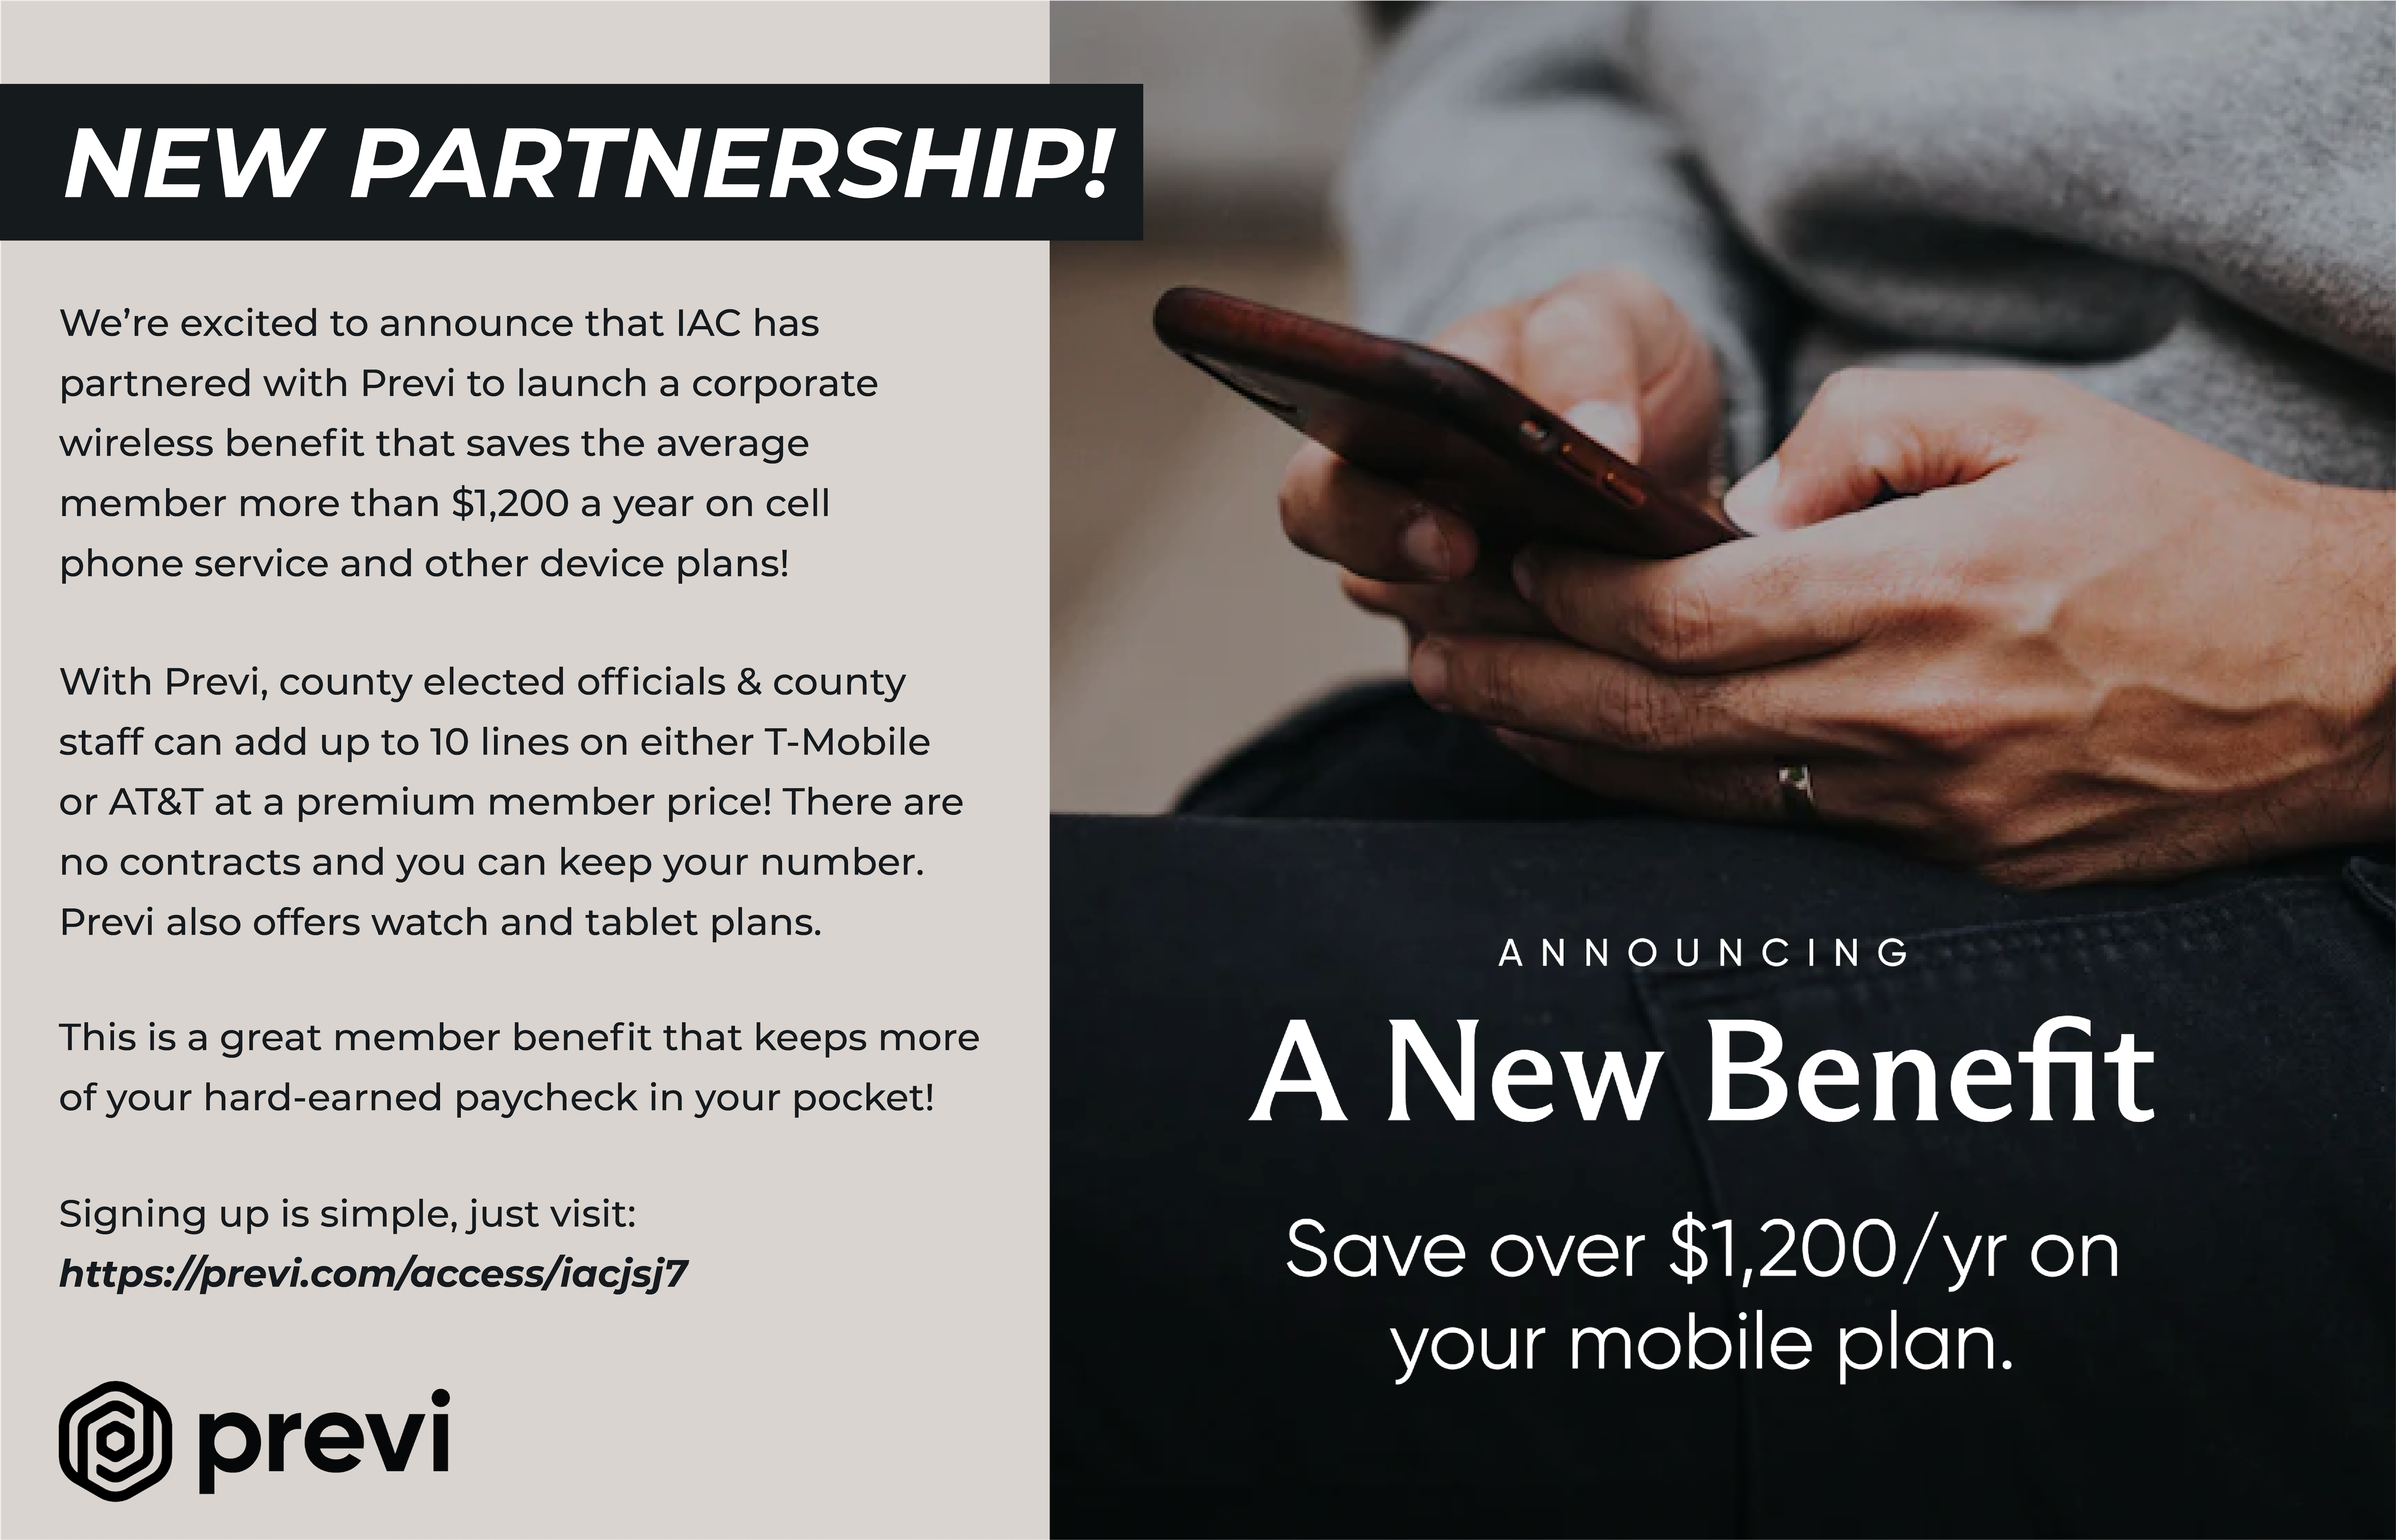 IAC Partners with Previ to Offer Member Benefits on Mobile Plans